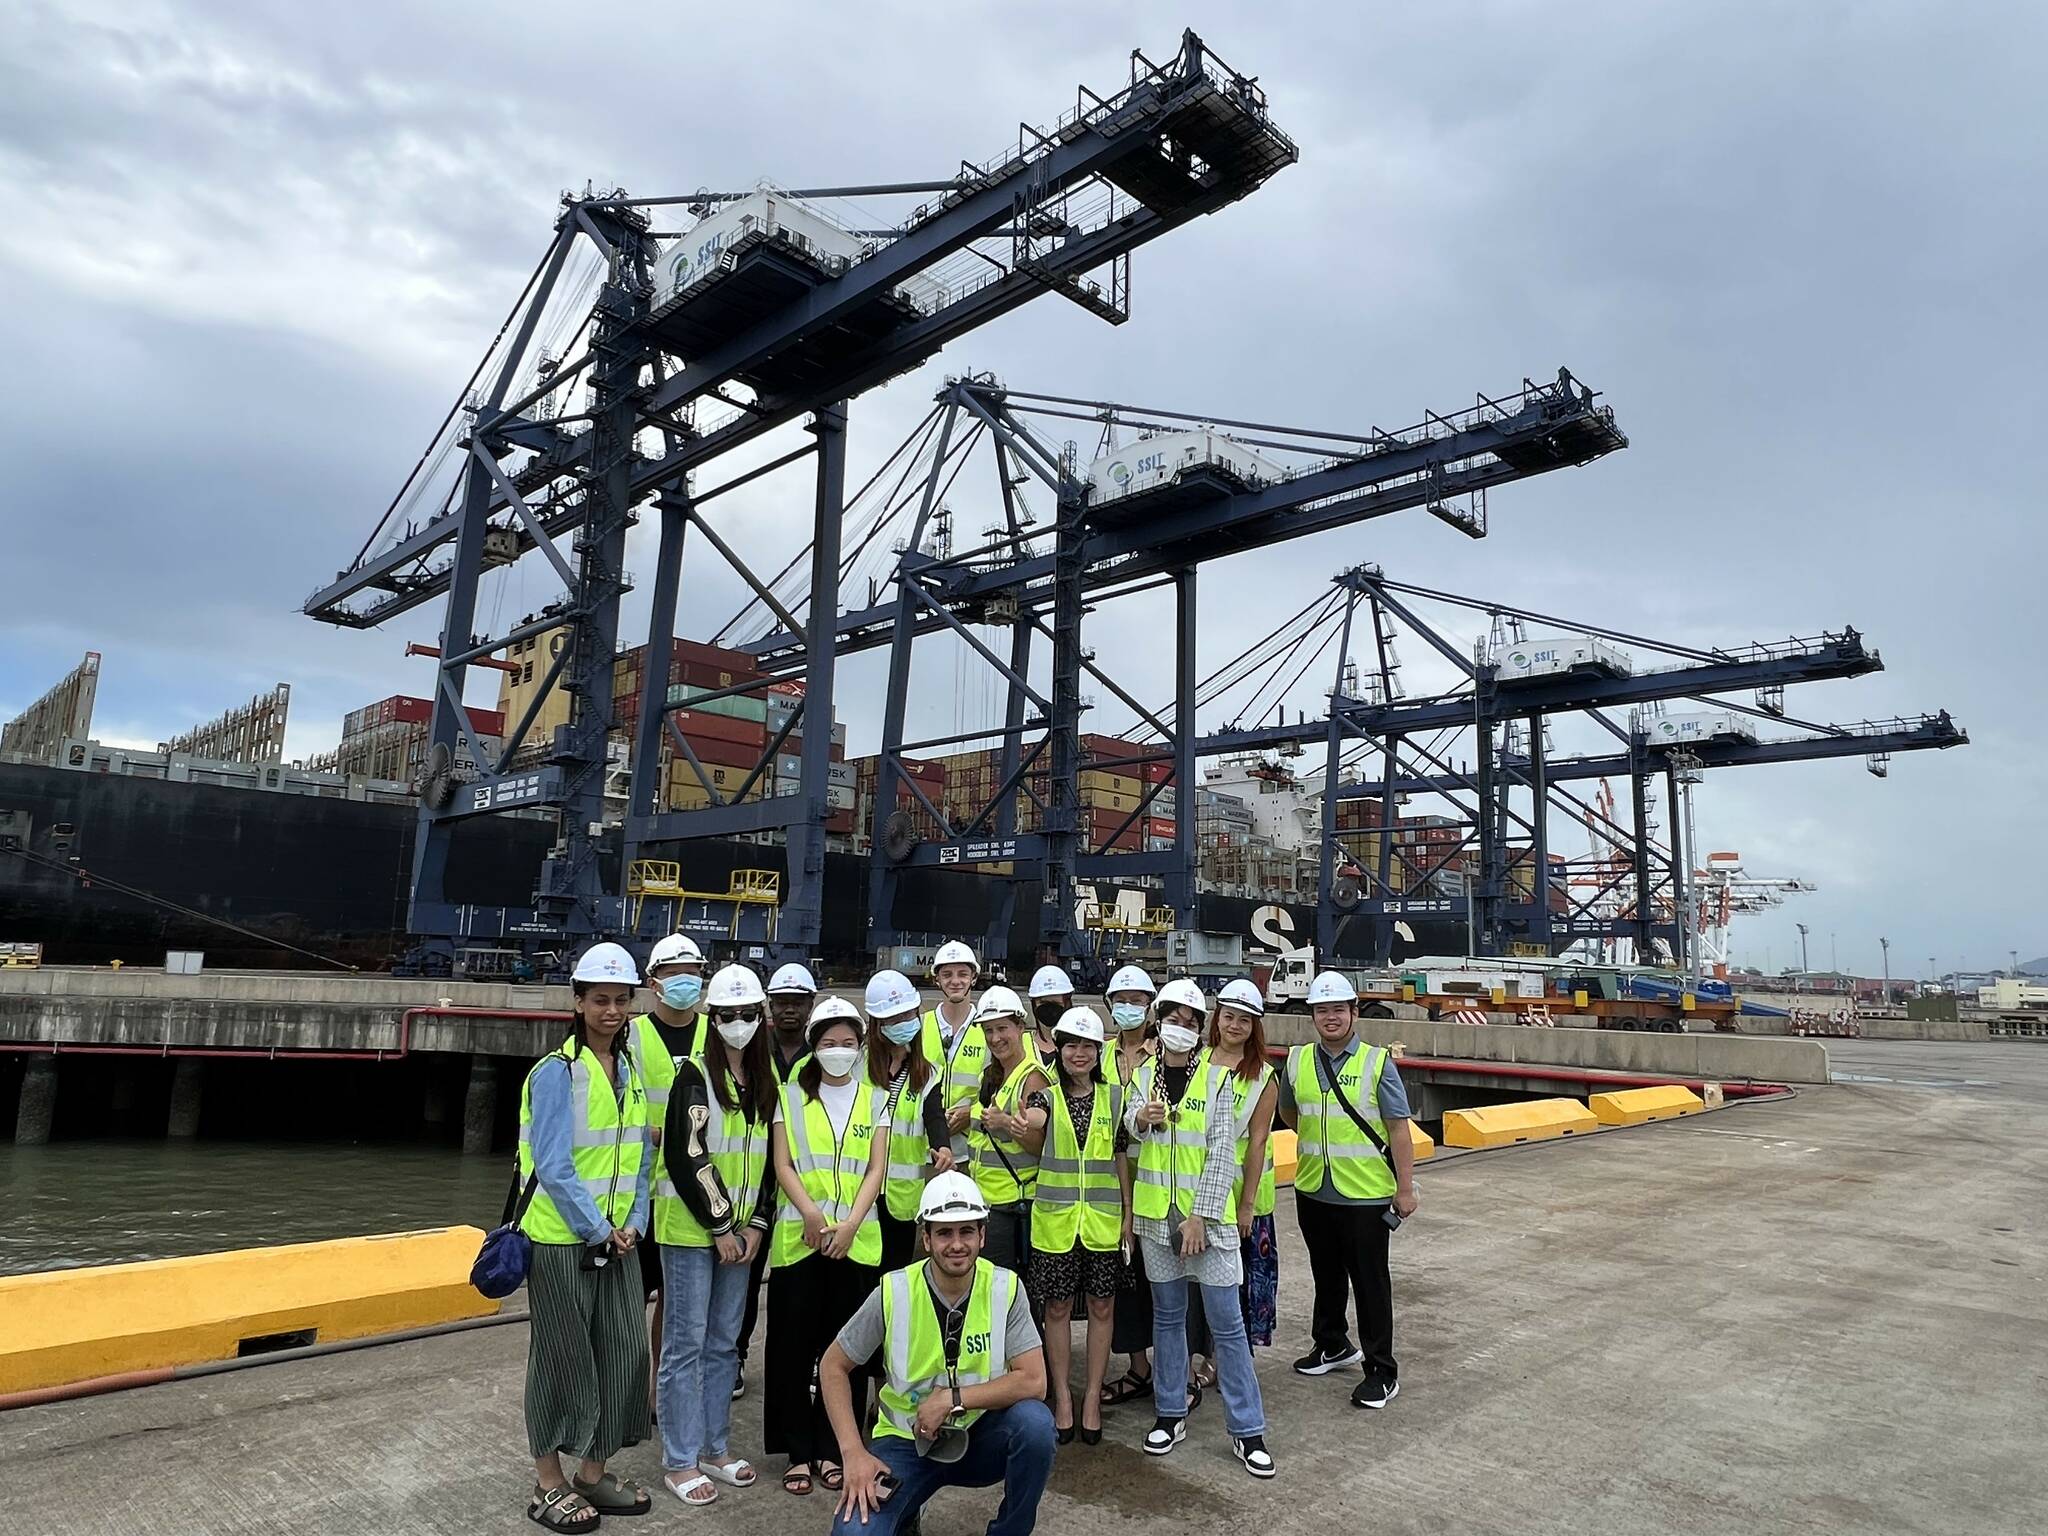 Students at the SP-SSA International Terminal (SSIT) port near Vung Tau, Vietnam. Photo courtesy of Highline College